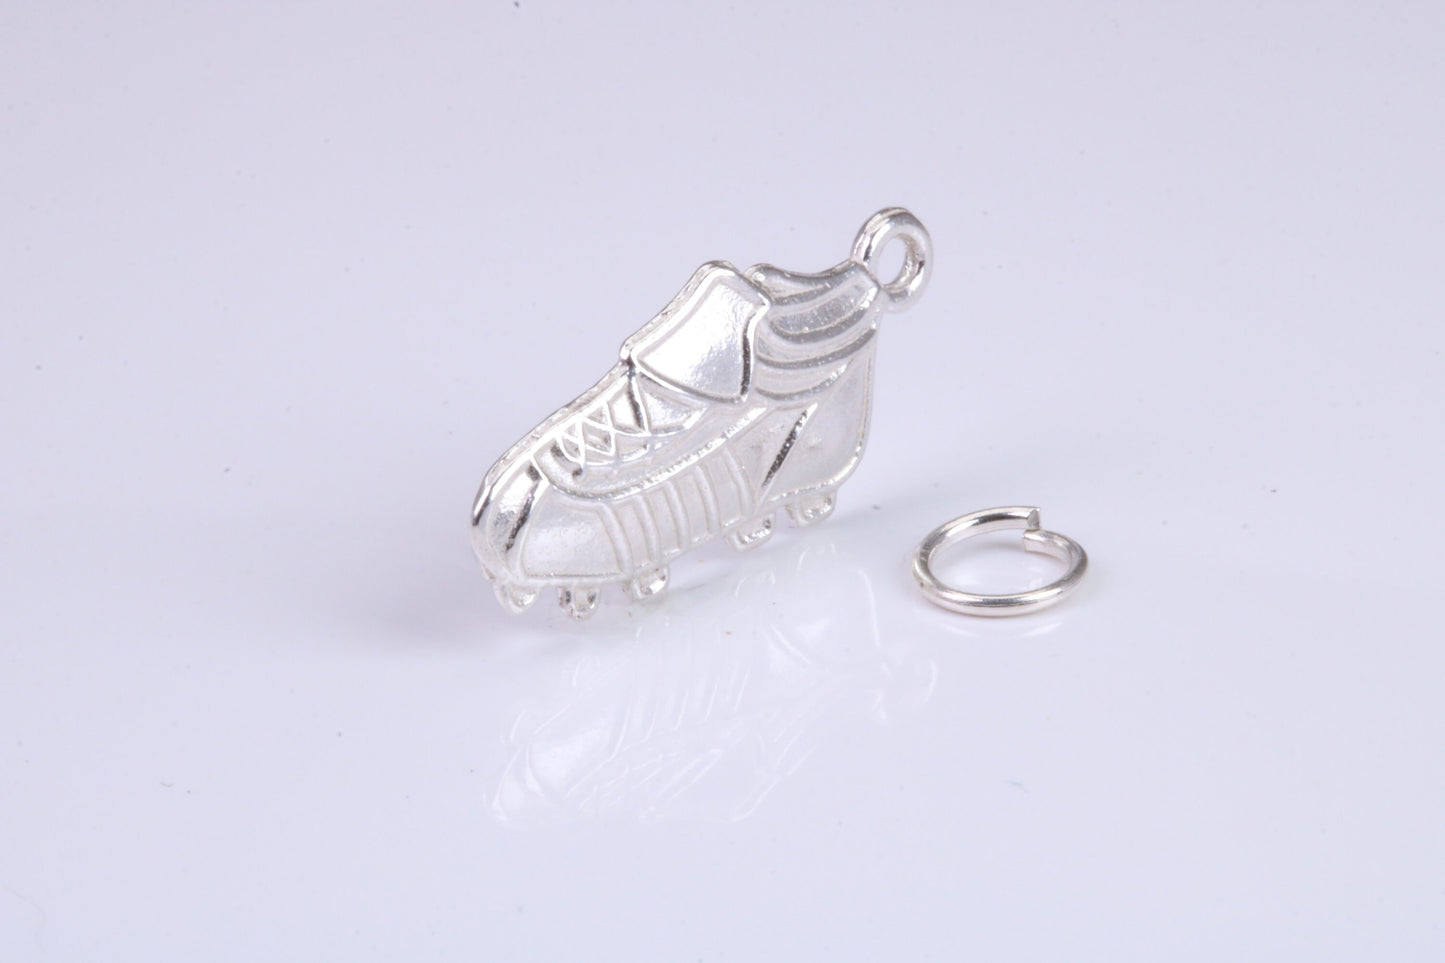 Soccer Boot Charm, Traditional Charm, Made from Solid 925 Grade Sterling Silver, Complete with Attachment Link